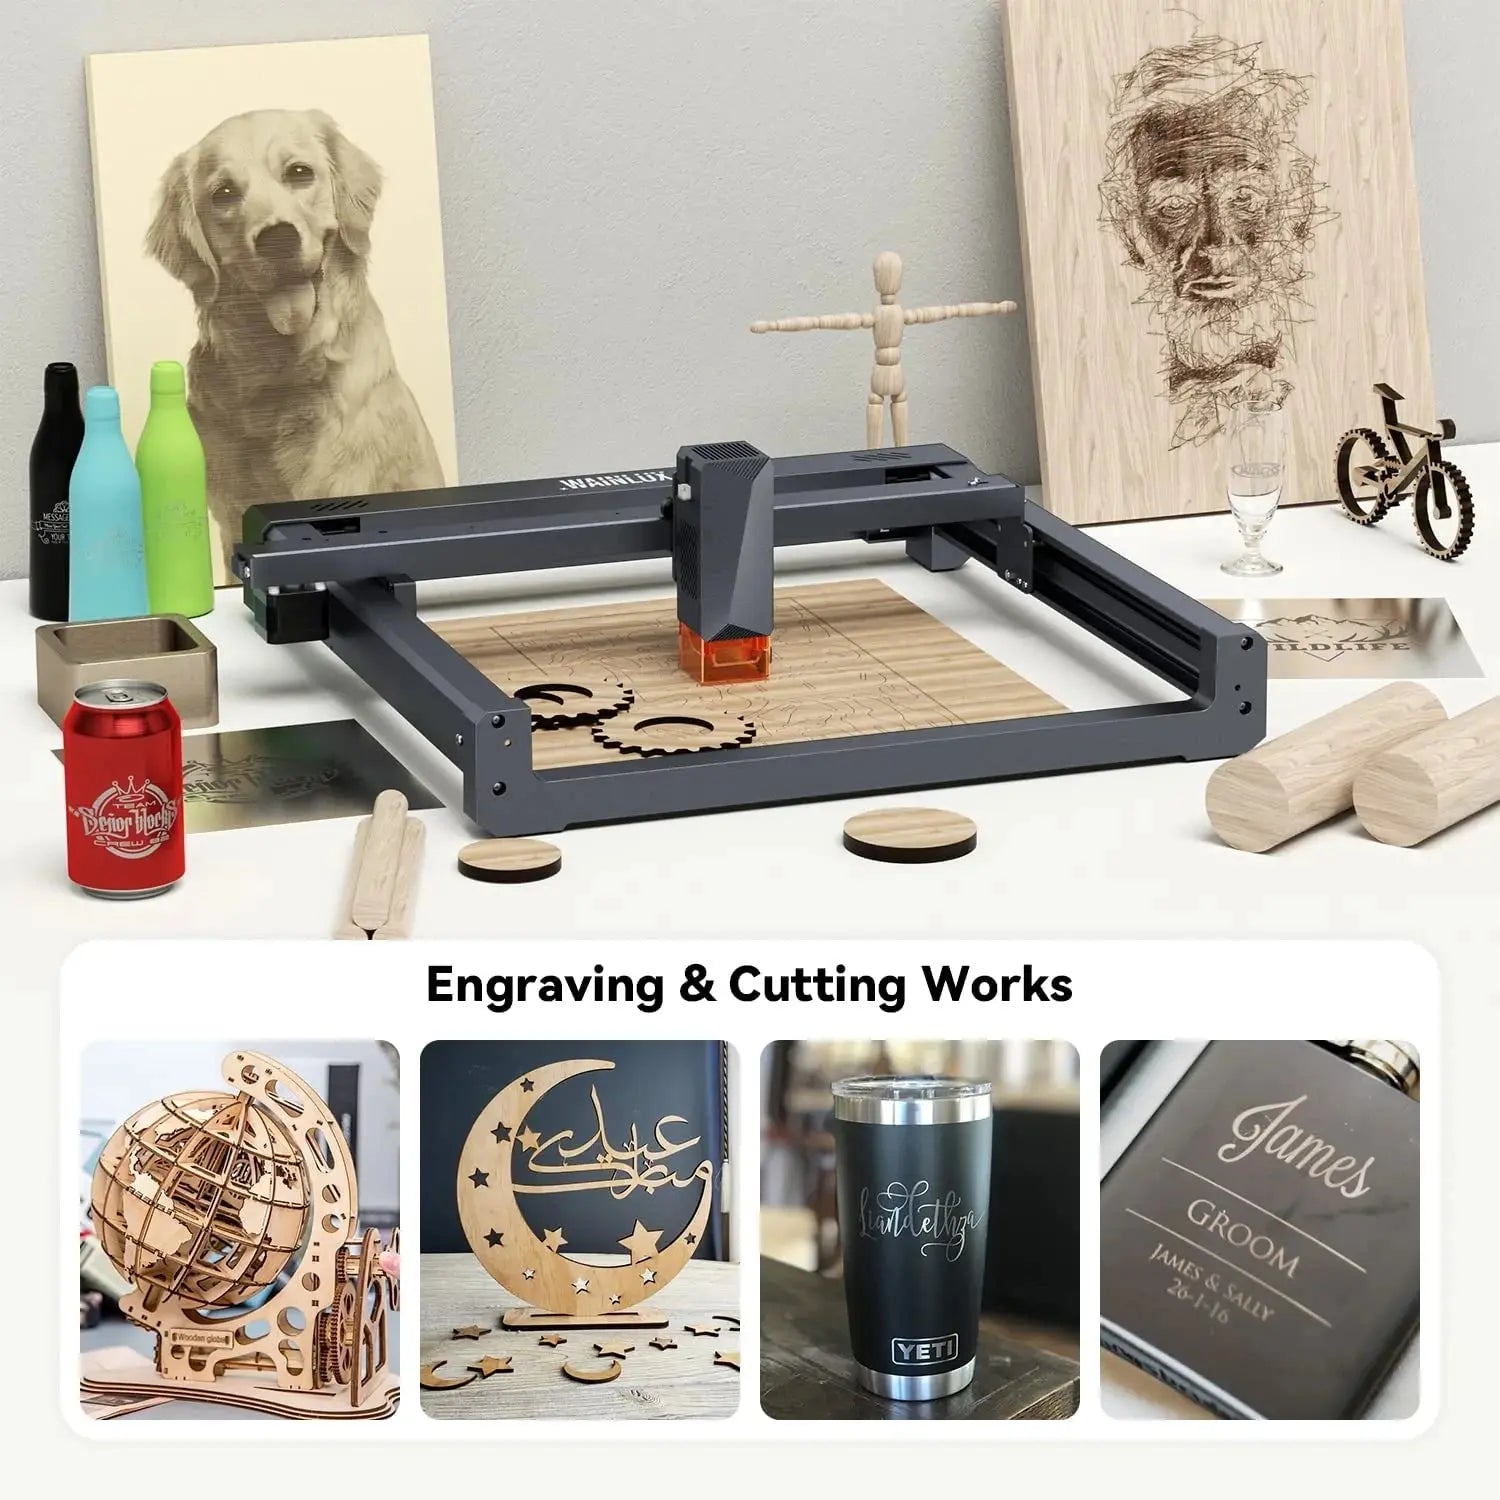 WAINLUX L6 Real 10W Laser Engraver and Cutter with Air Assist Kits6